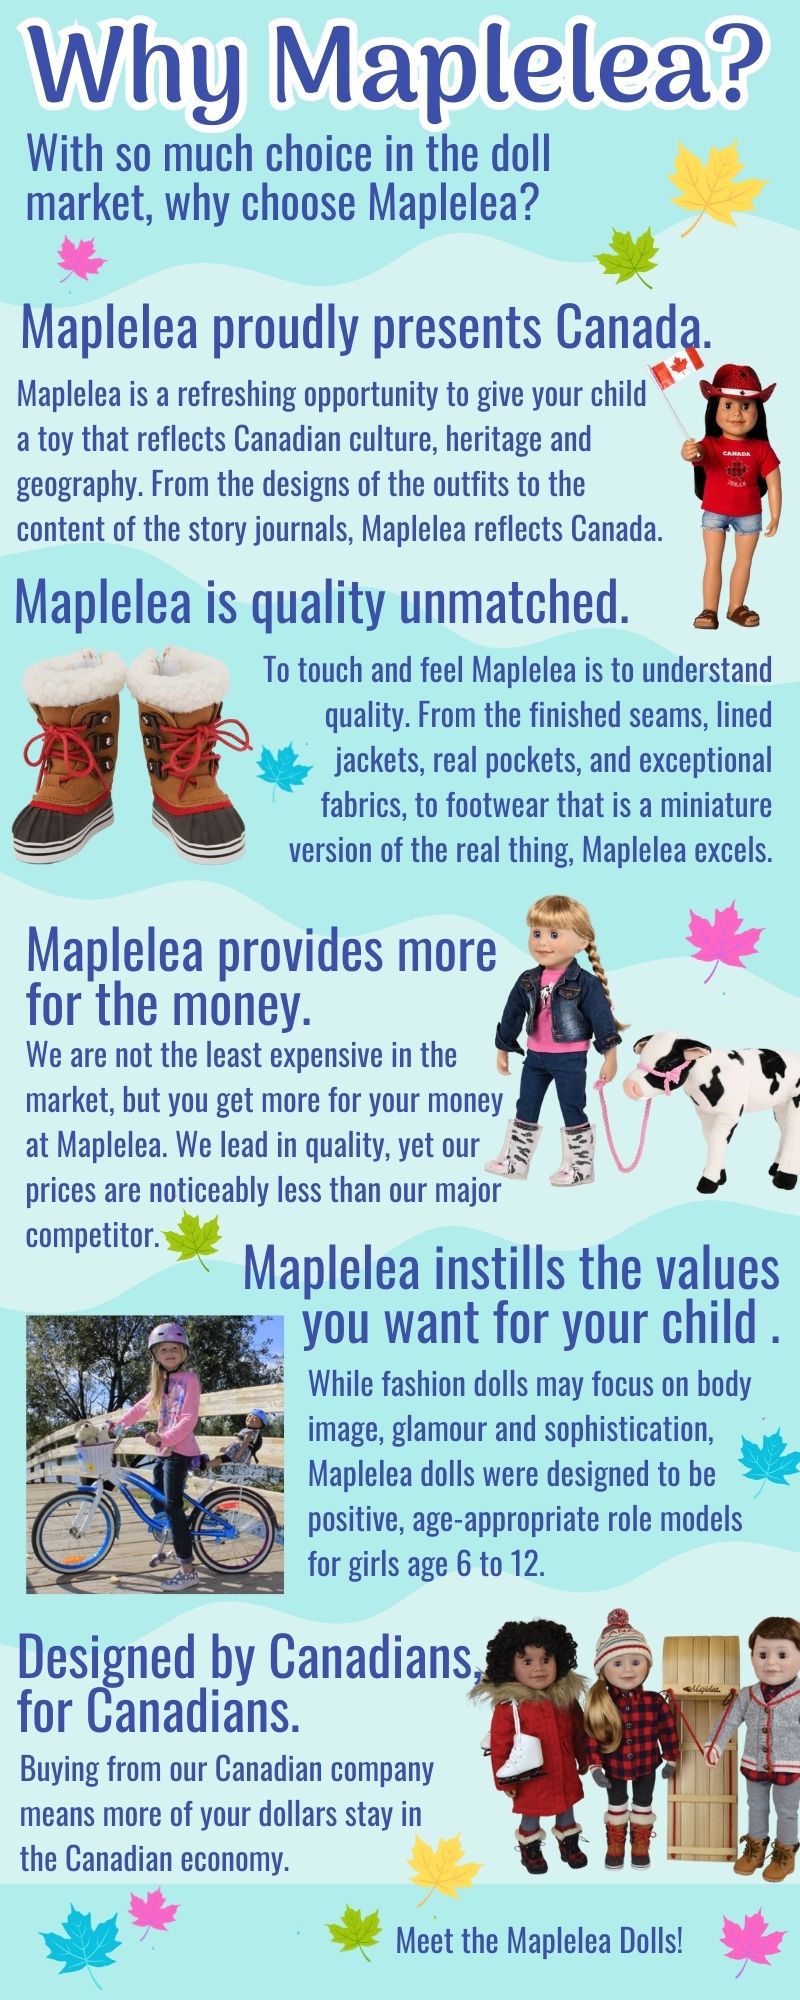 Why Maplelea dolls for your child